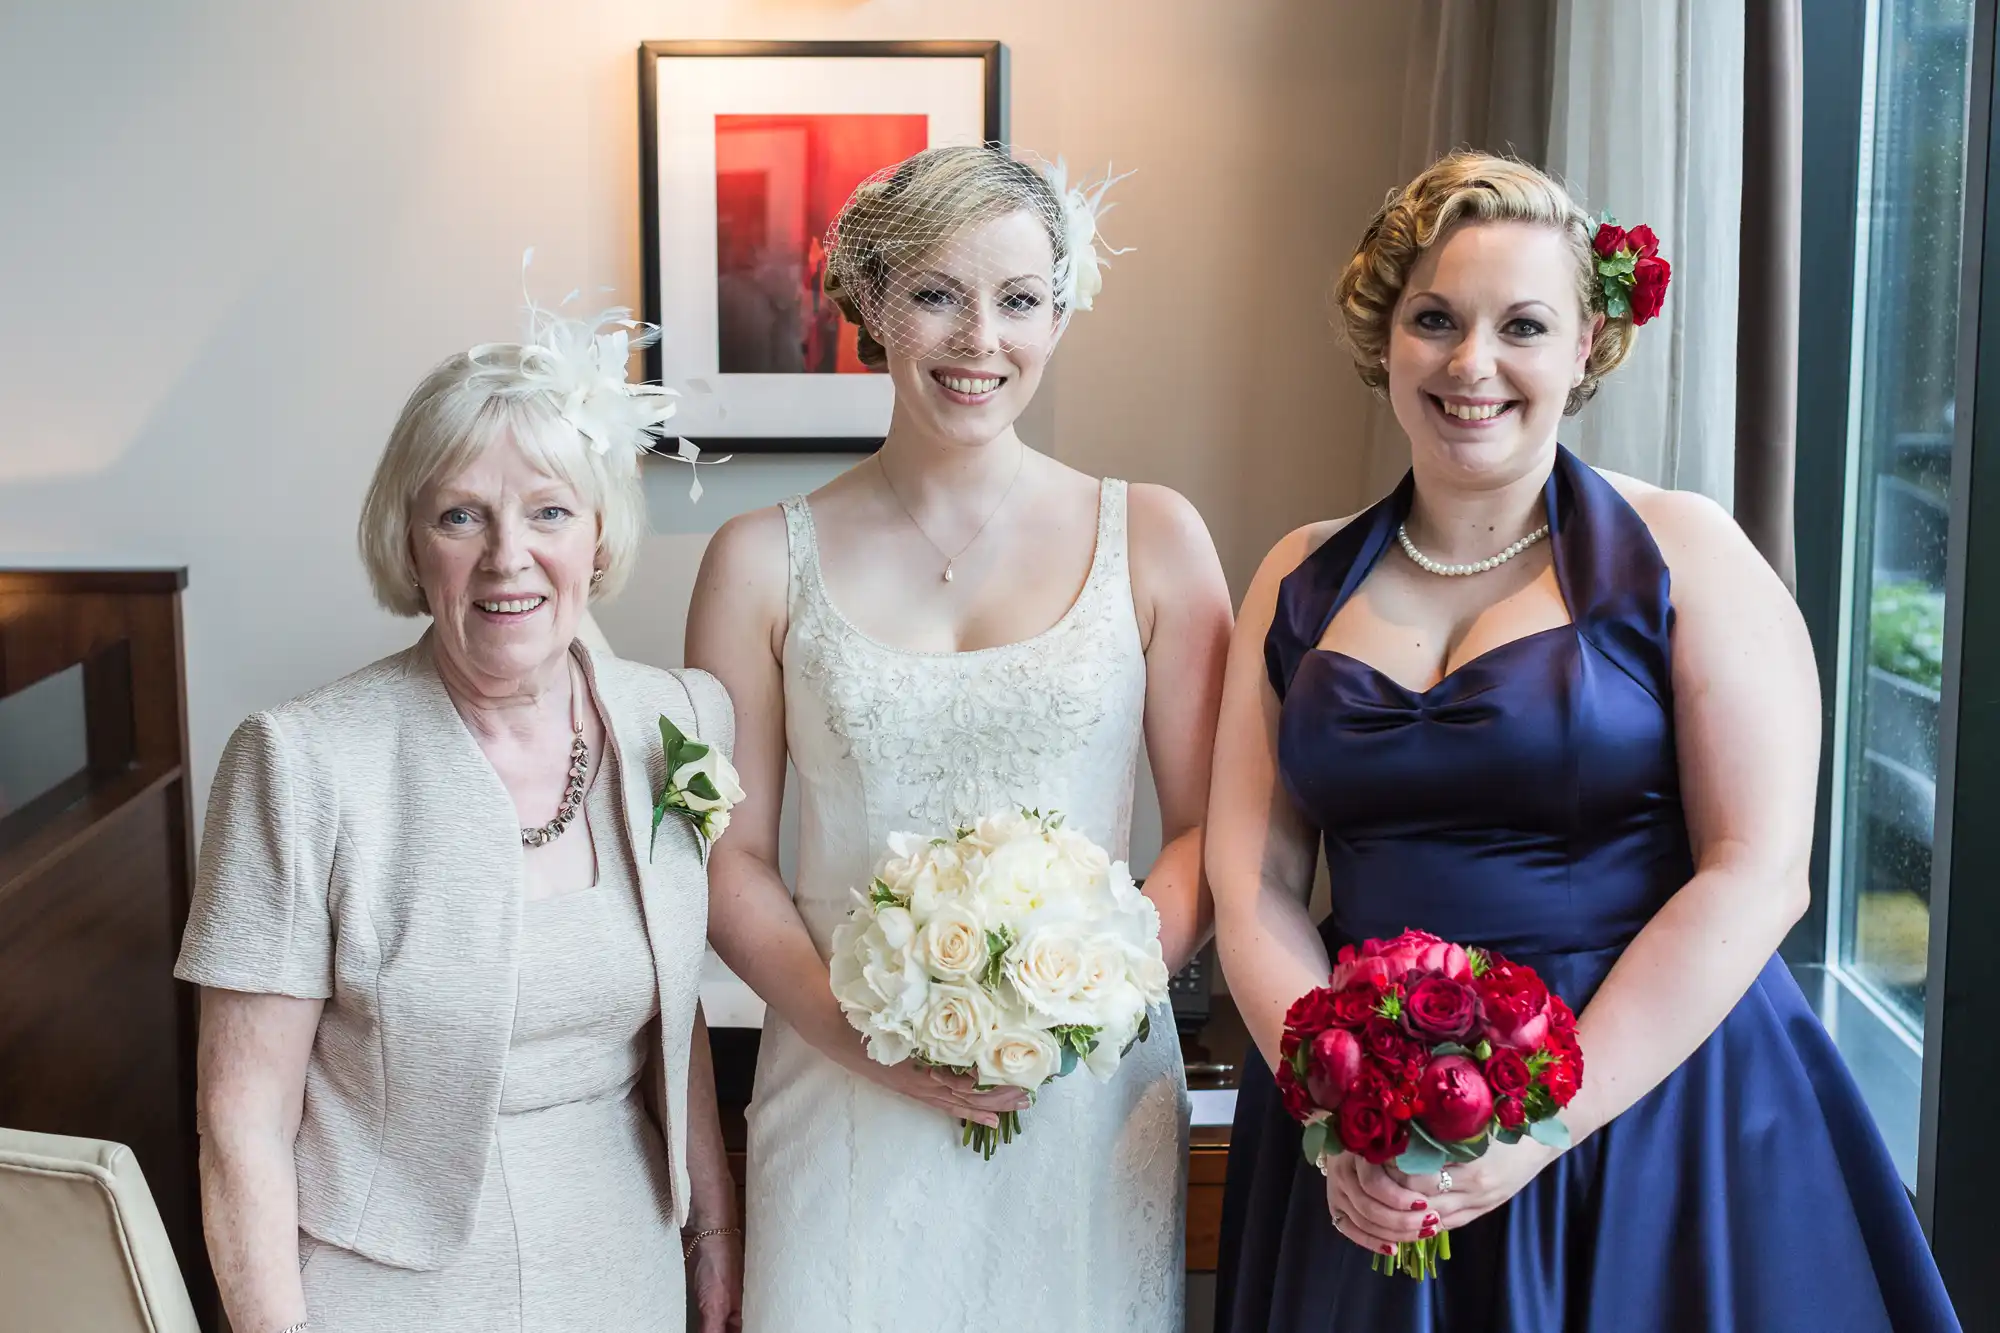 Three women in formal attire posing indoors, one in a wedding dress with a bouquet, flanked by two others in dresses, one holding red flowers.